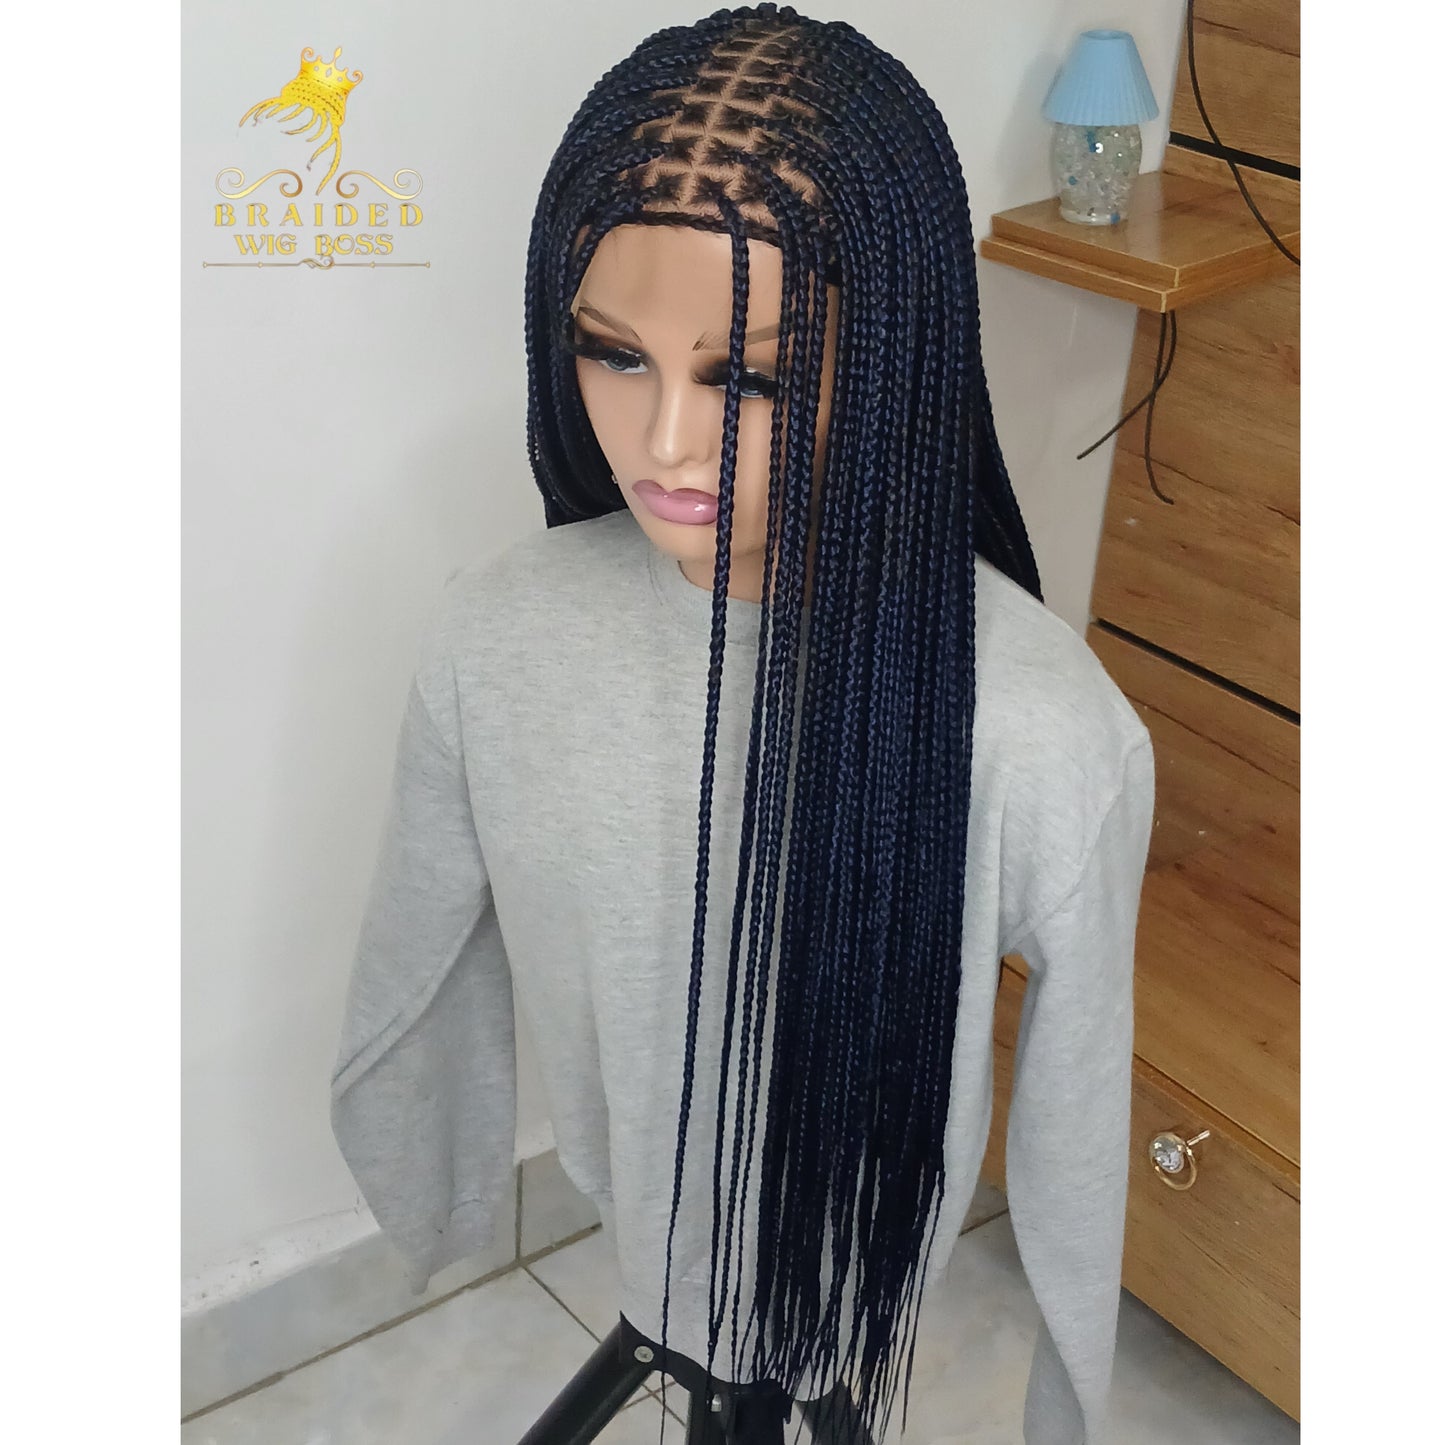 New Dark Blue Knotless Braid Wig Available on Full Lace Wig & Braided Lace Front Wig African Braided Wigs for Black Women Box Braid Wig